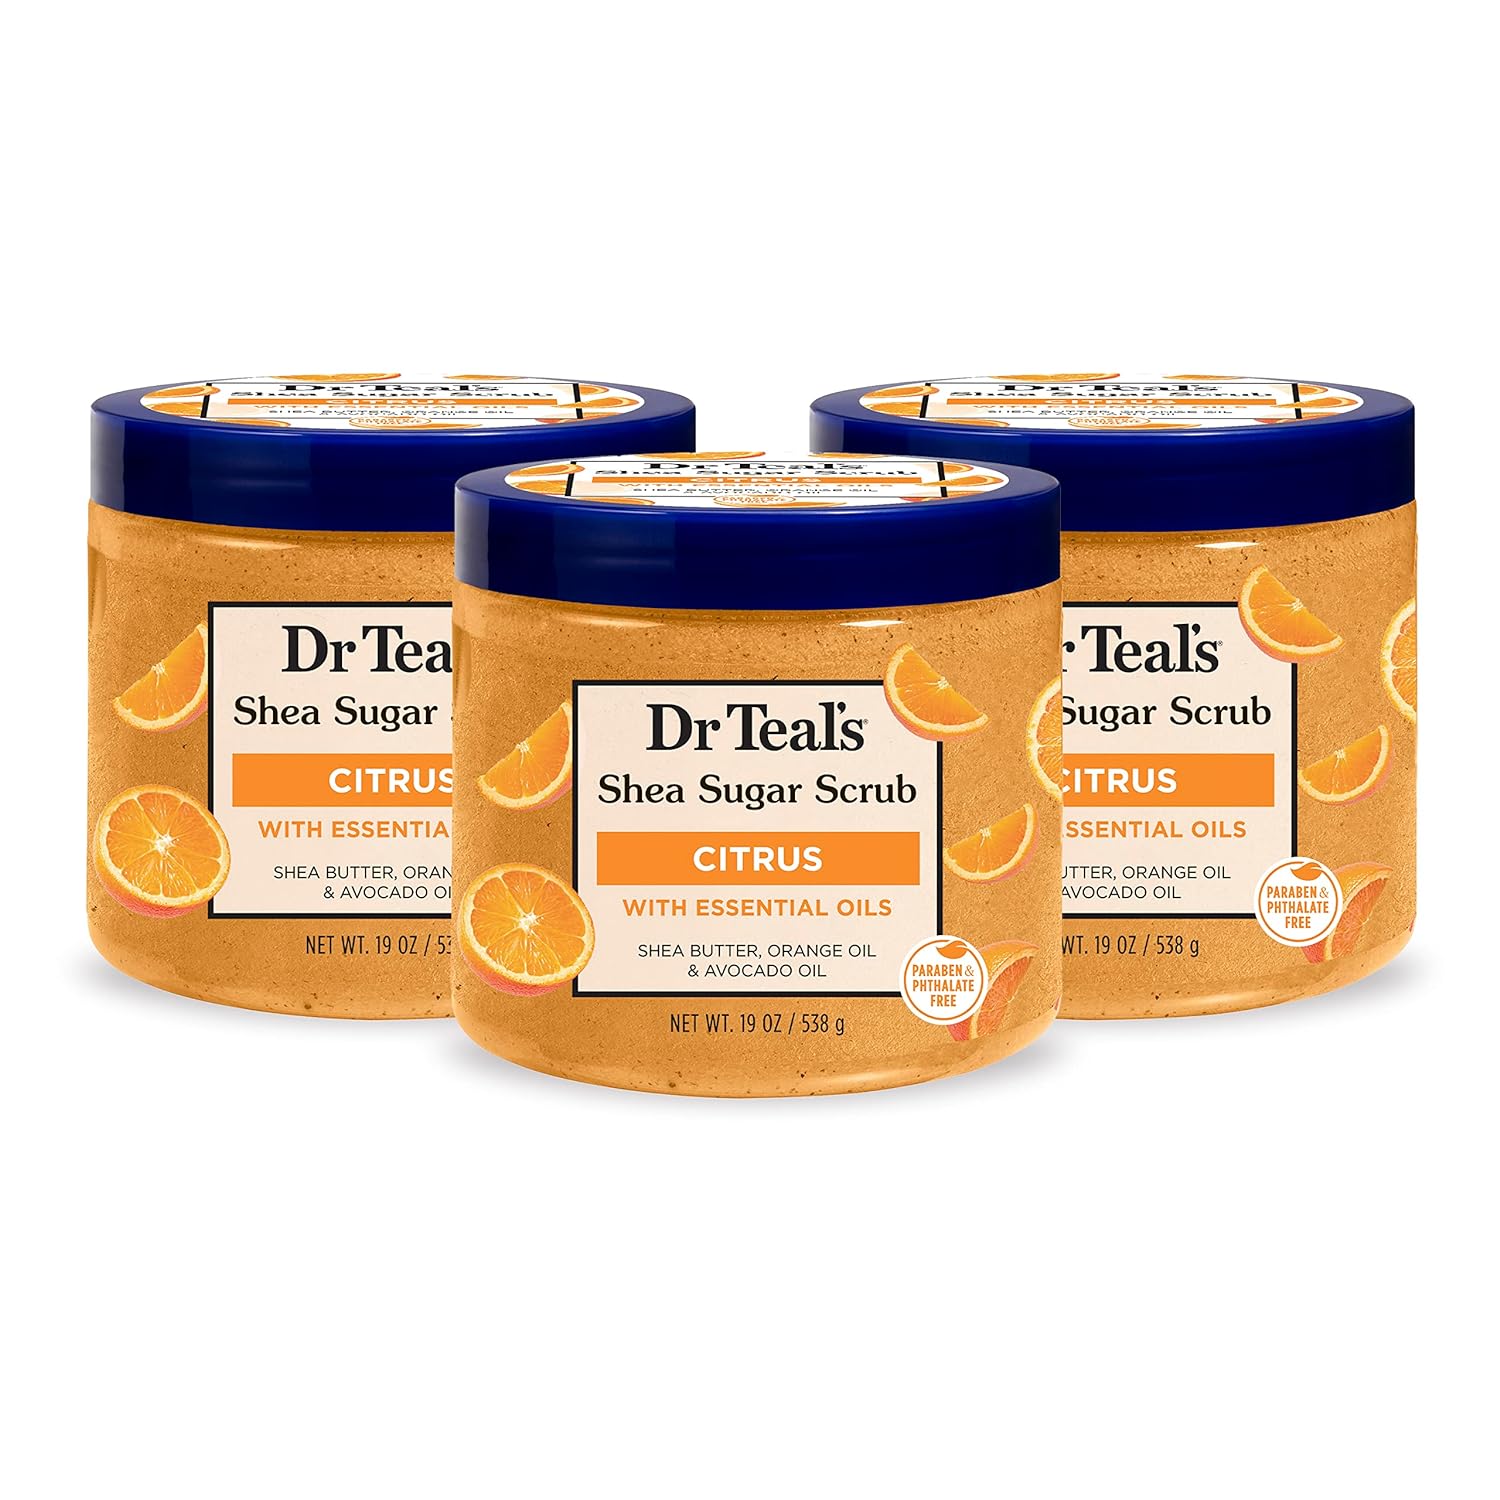 Dr Teal's Shea Sugar Body Scrub, Citrus with Essential Oils & Vitamin C, 19 oz (Pack of 3) (Packaging May Vary)